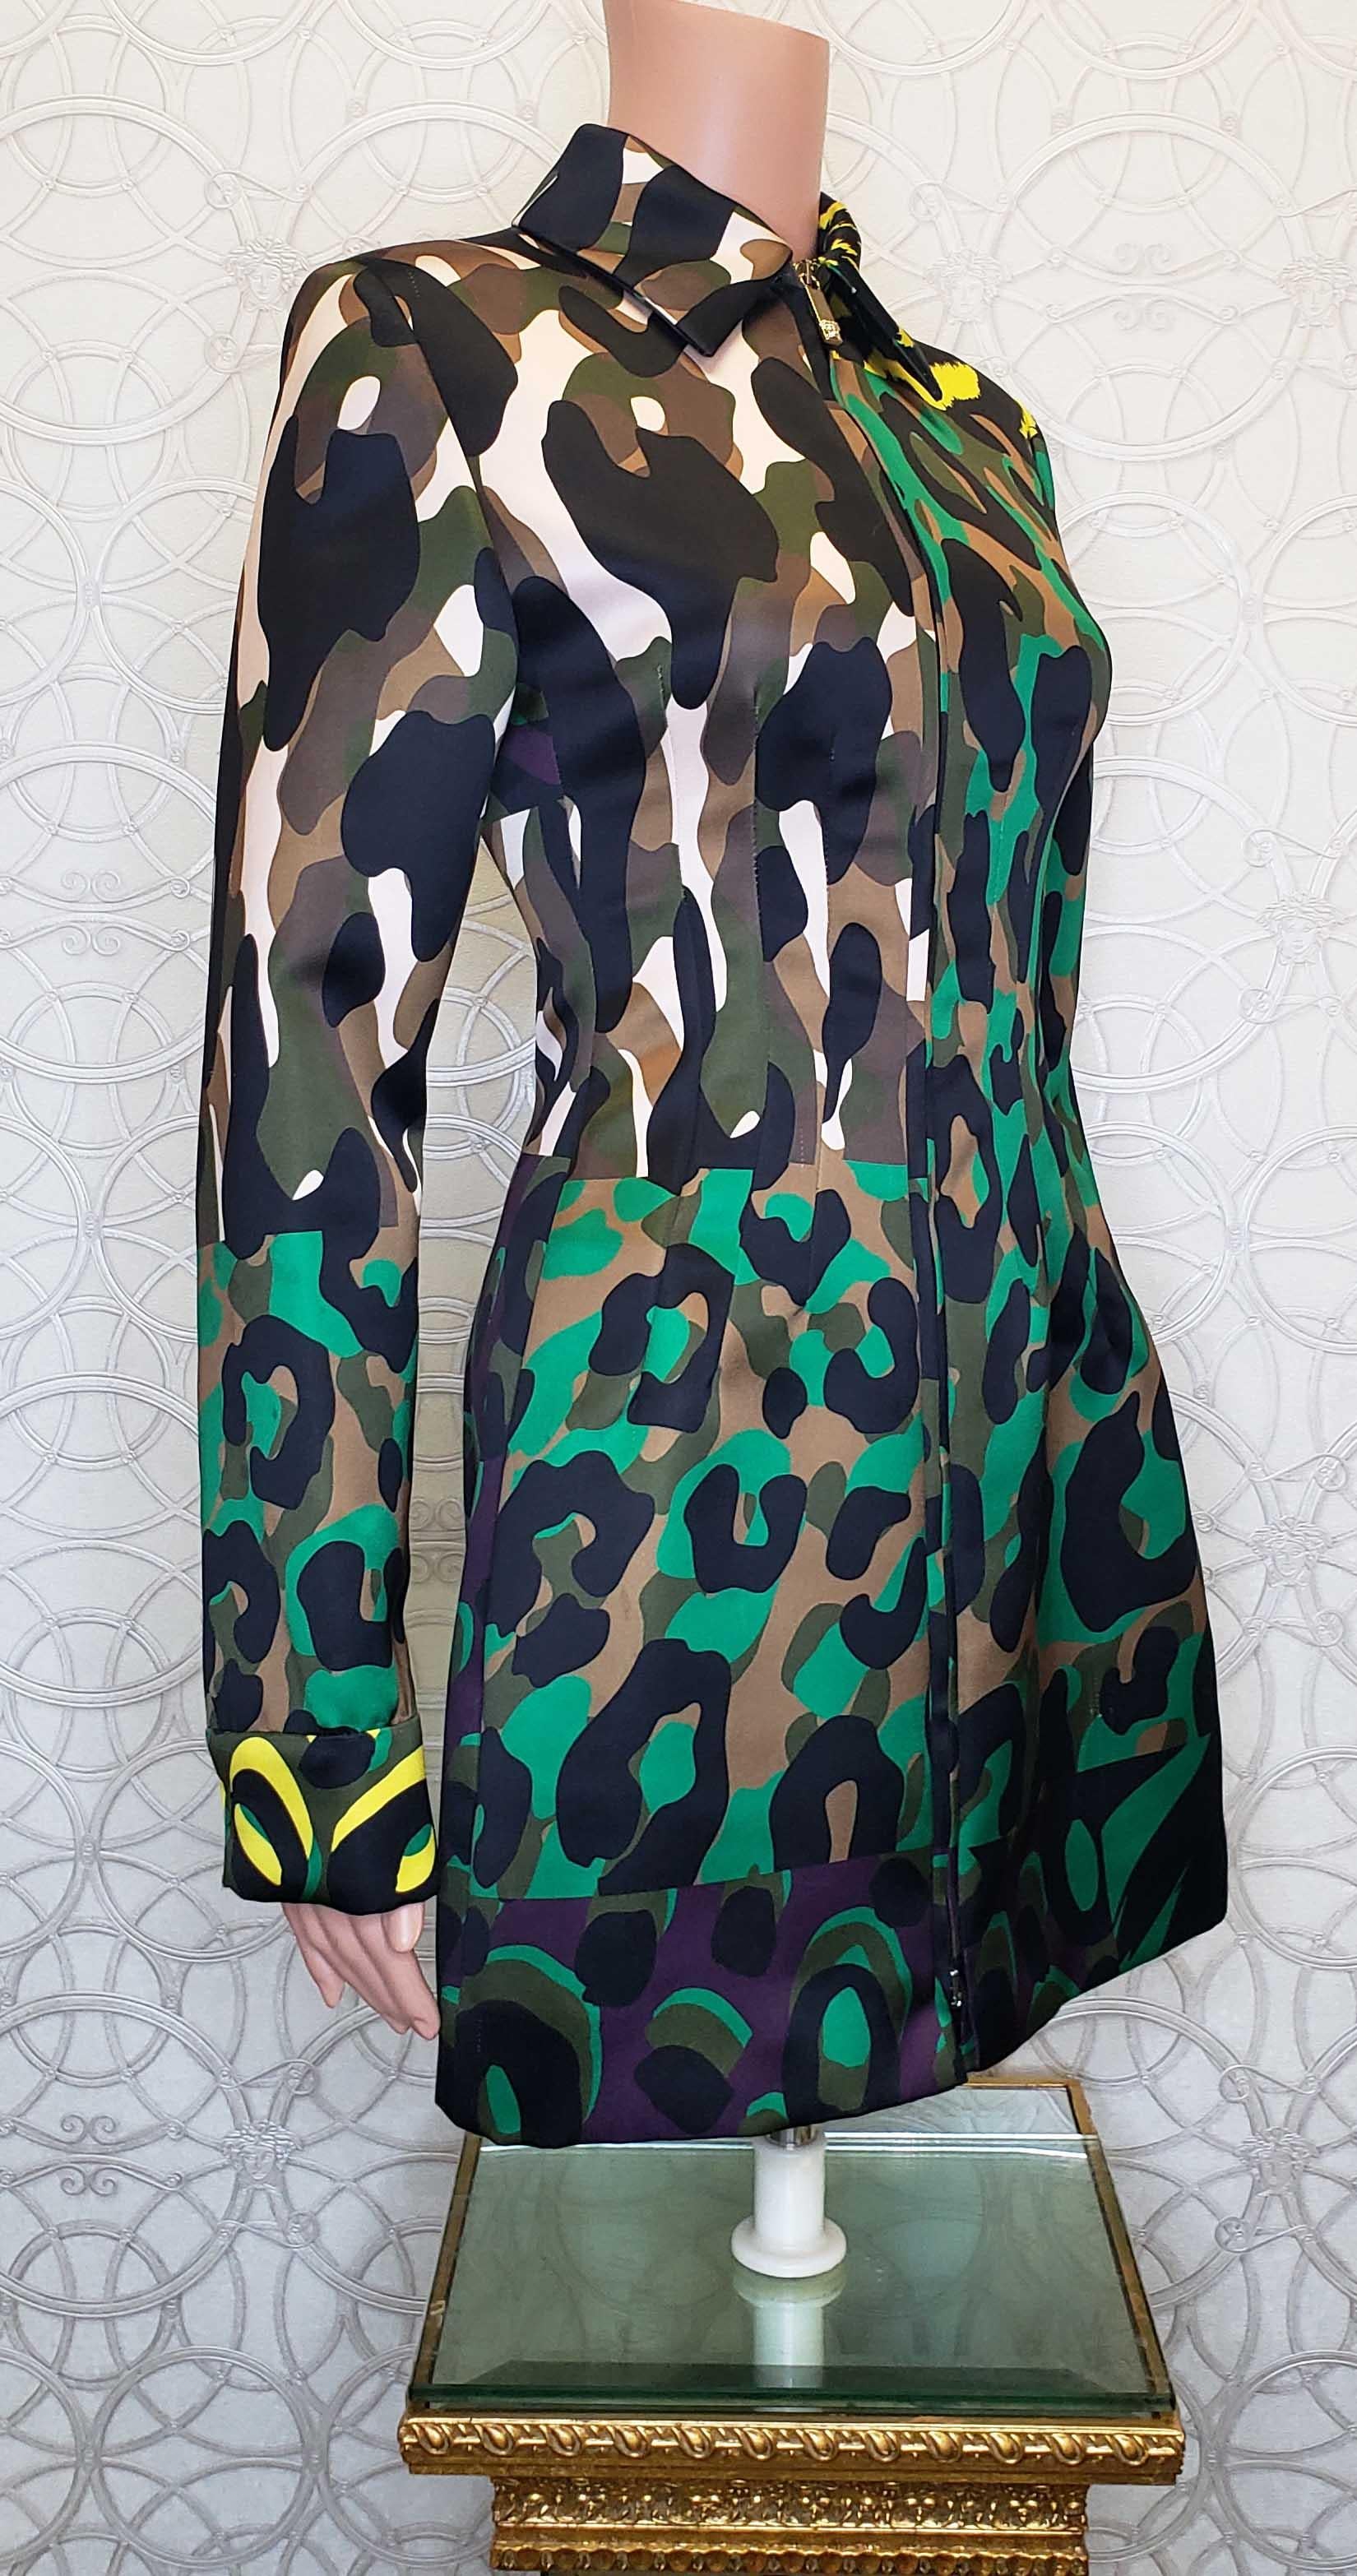 S/S 2016 L # 31 NEW VERSACE MULTI COLOR MILITARY Coat 38 - 2 For Sale 6